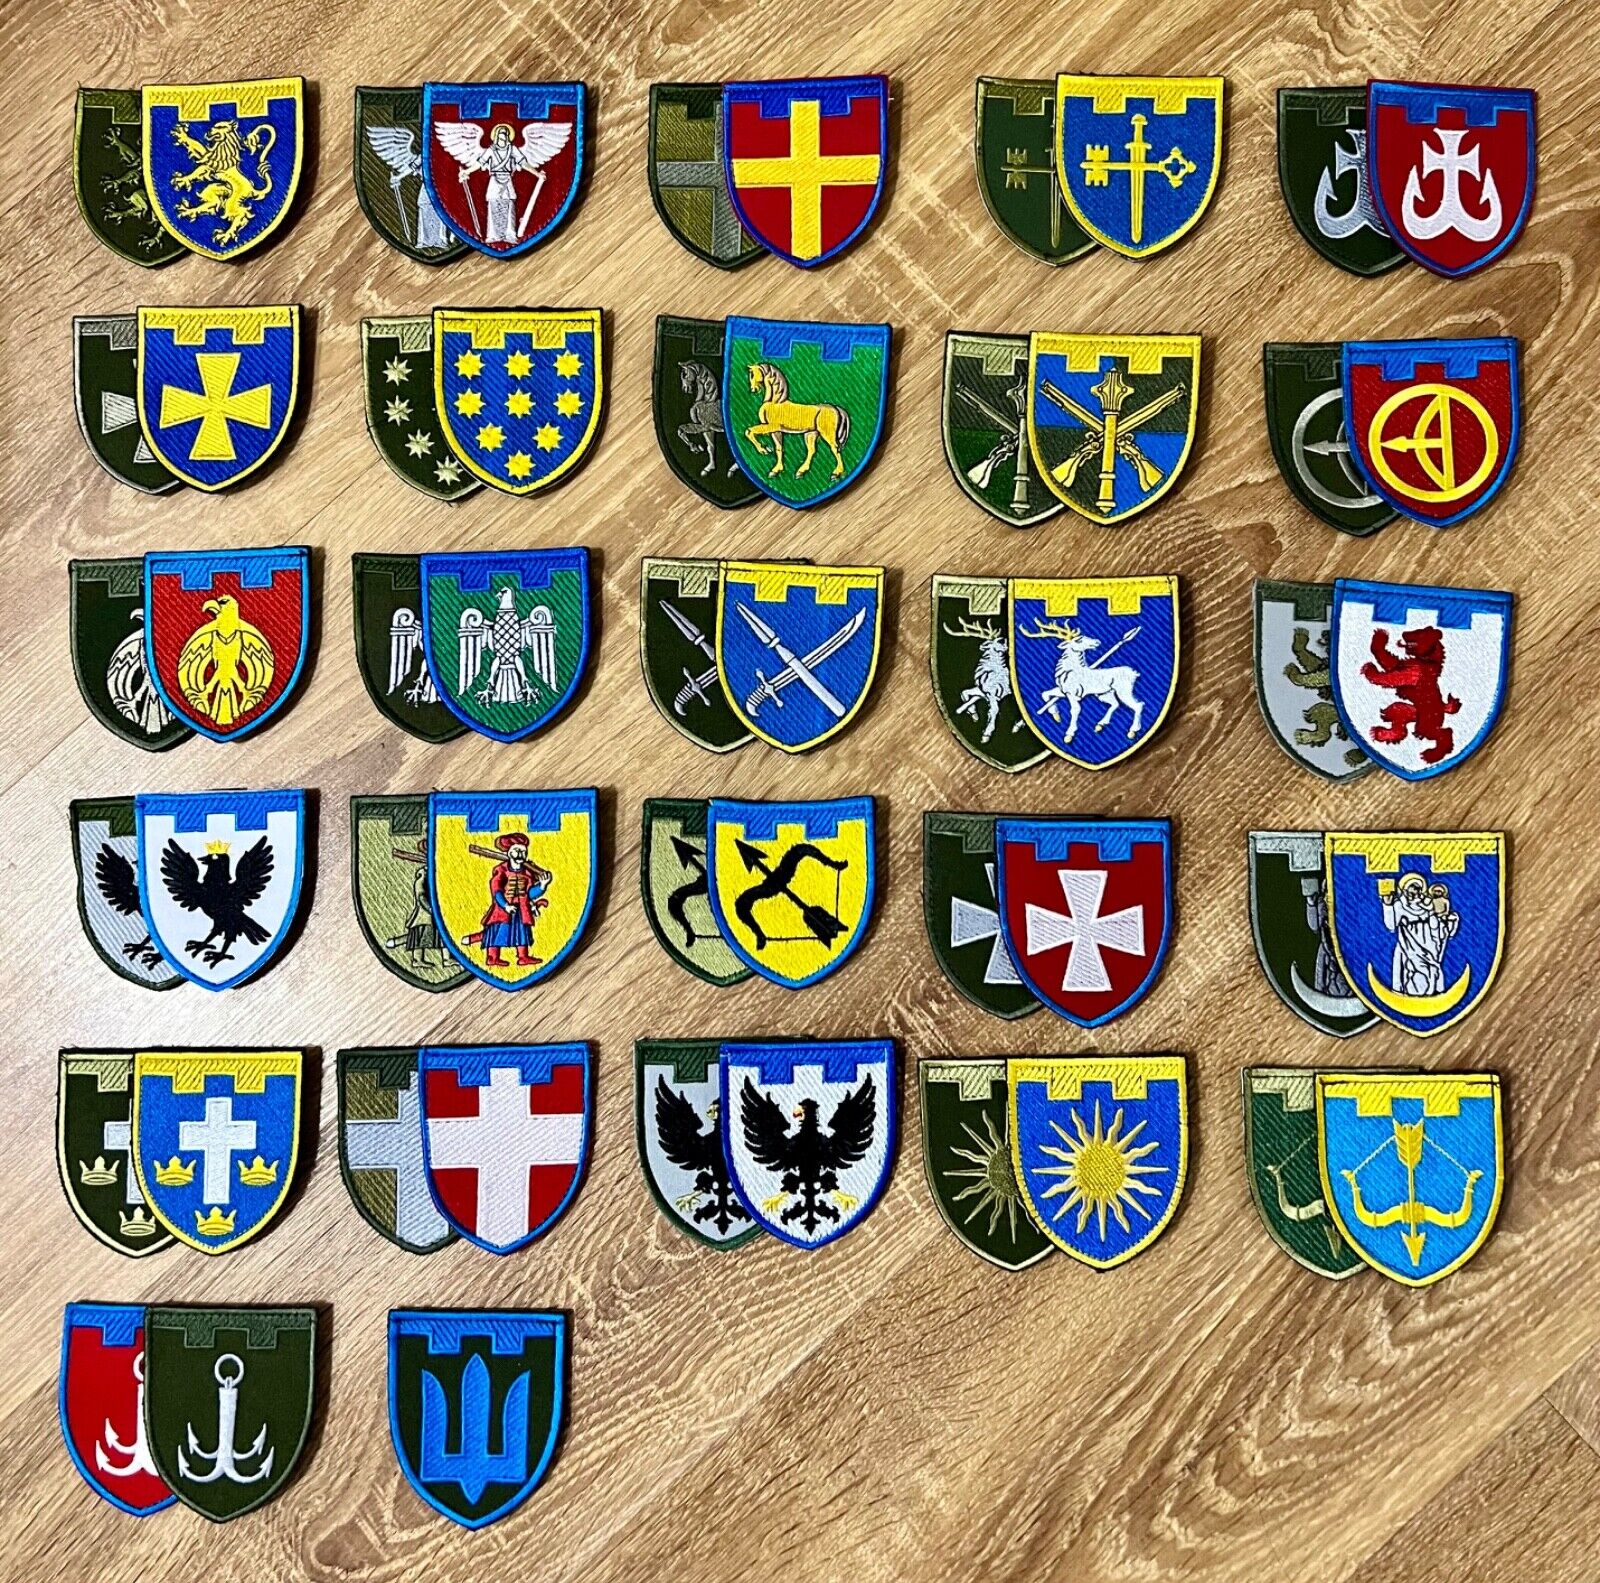 Ukraine patch set of 53 military war army  patches Ukrainian armed forces